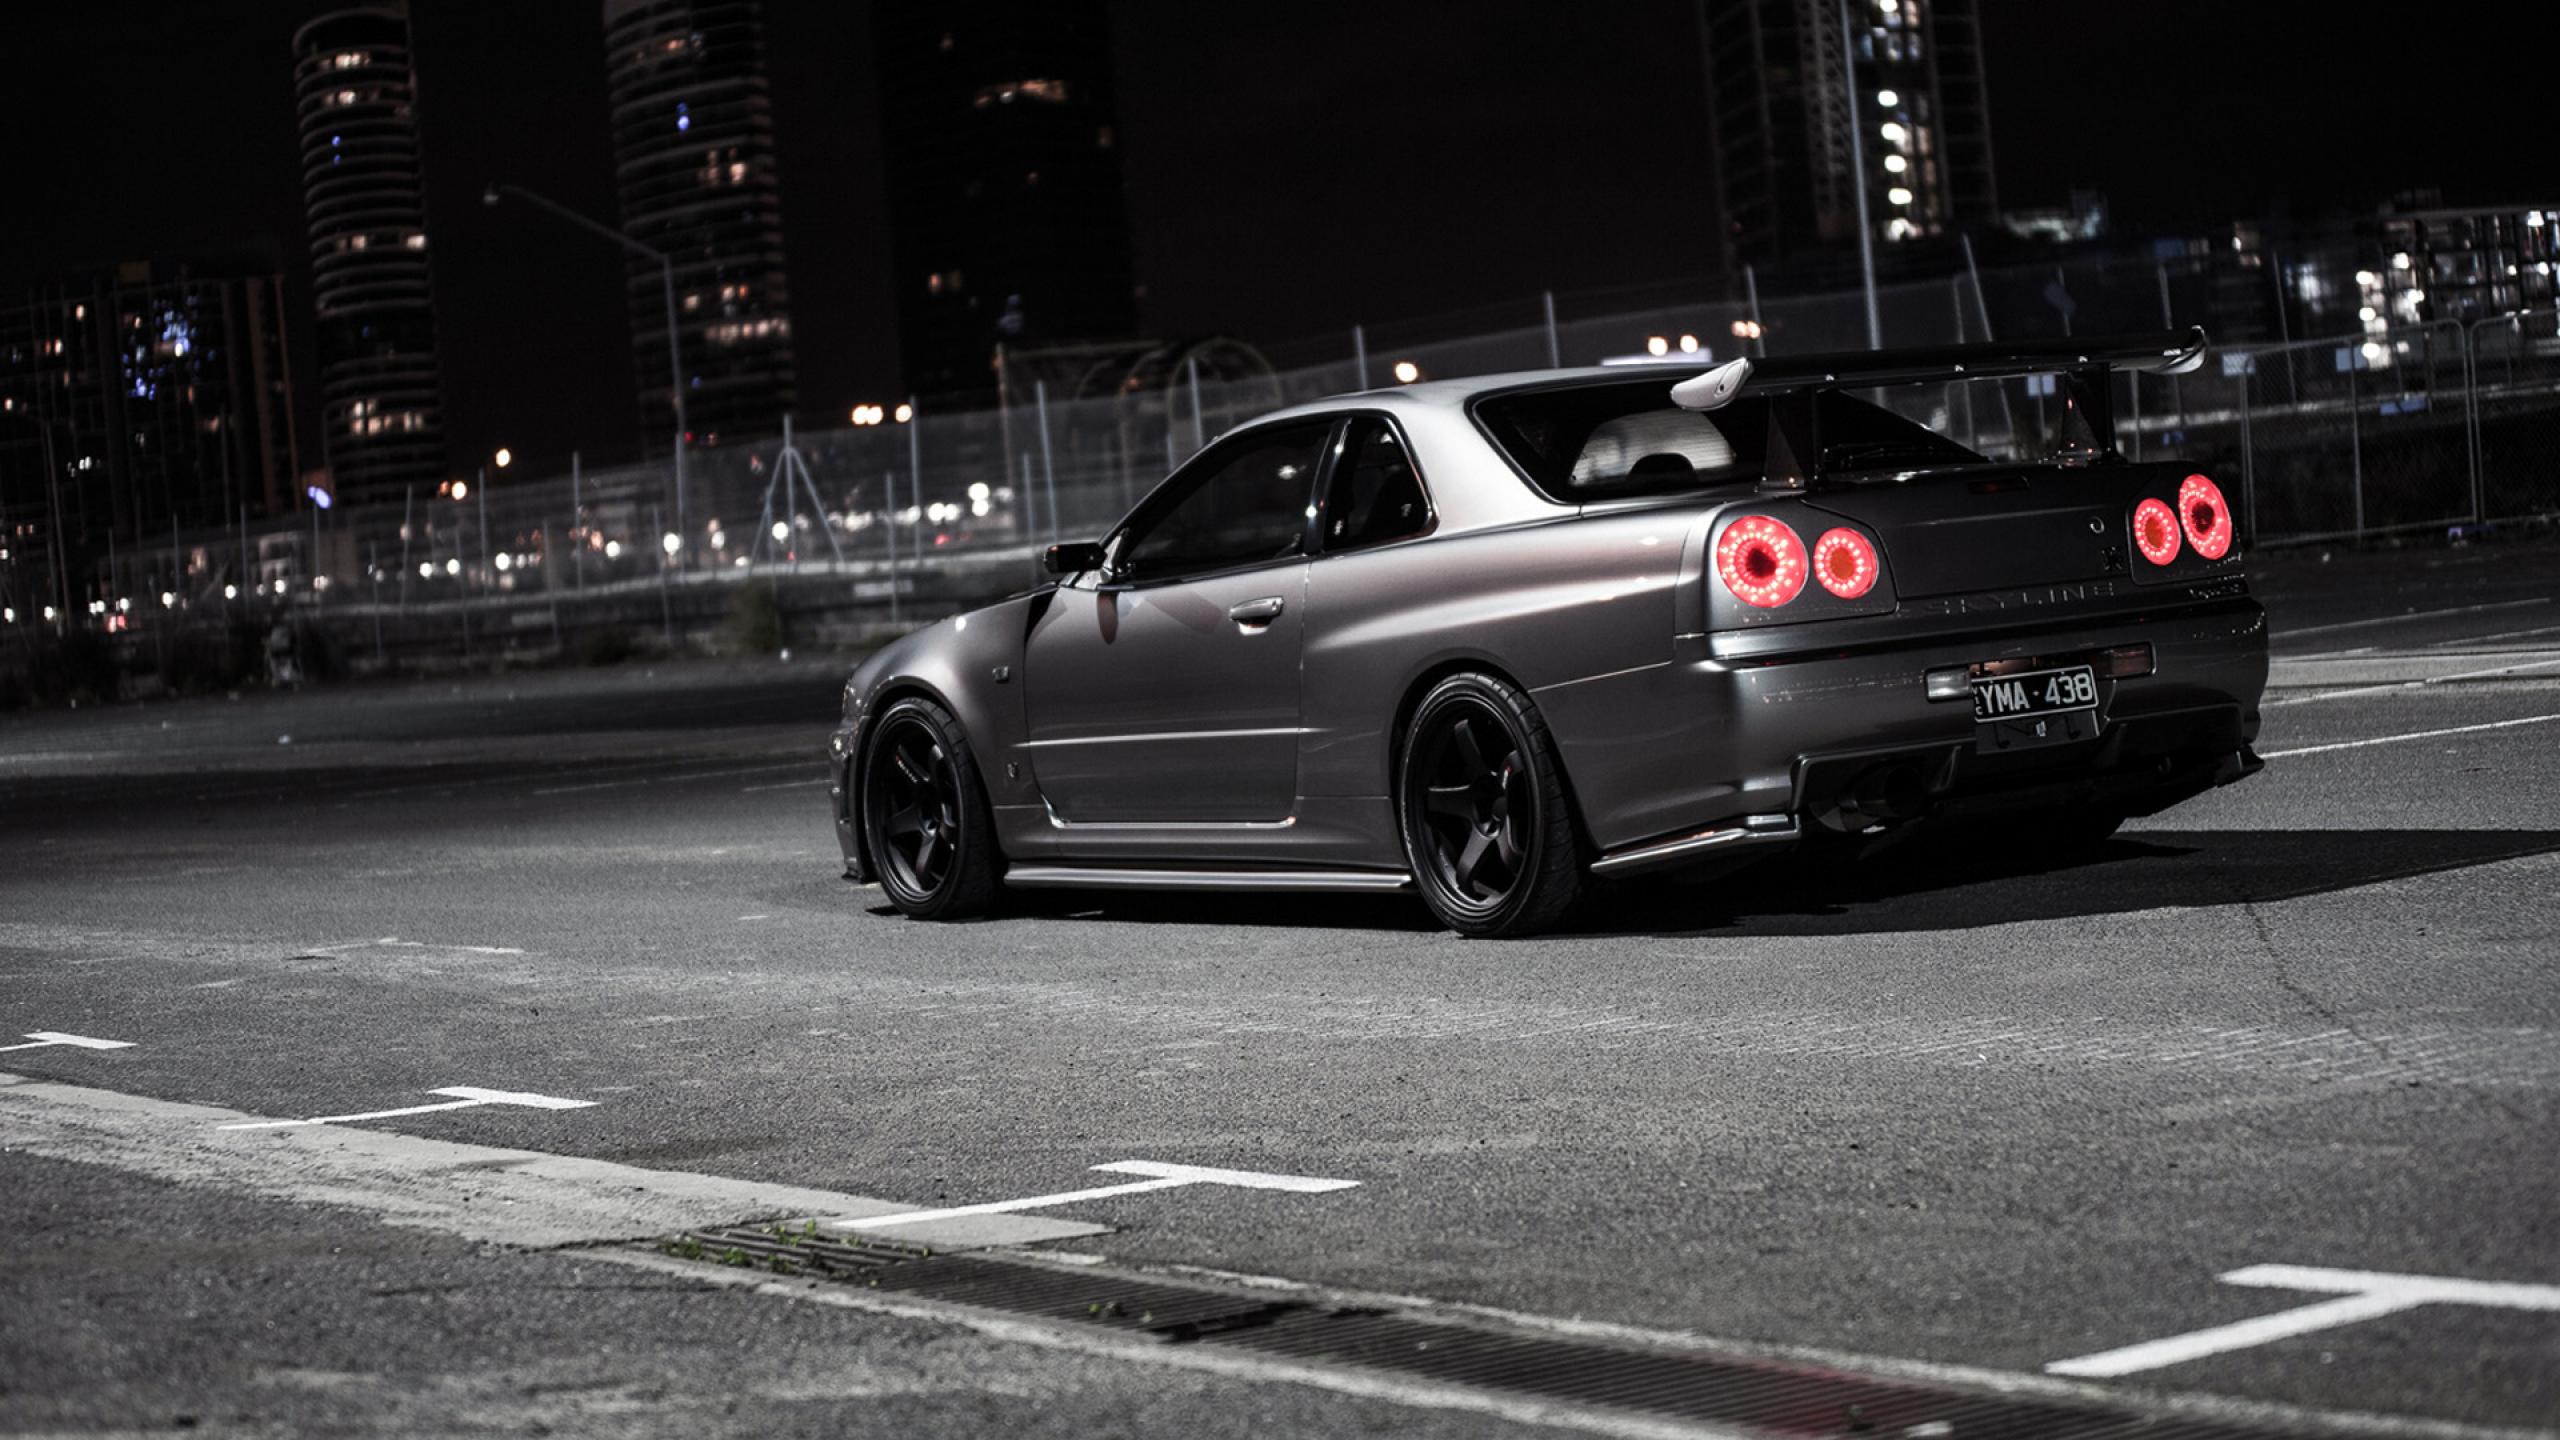 Nissan Skyline GT-R Wallpapers HD | Full HD Pictures